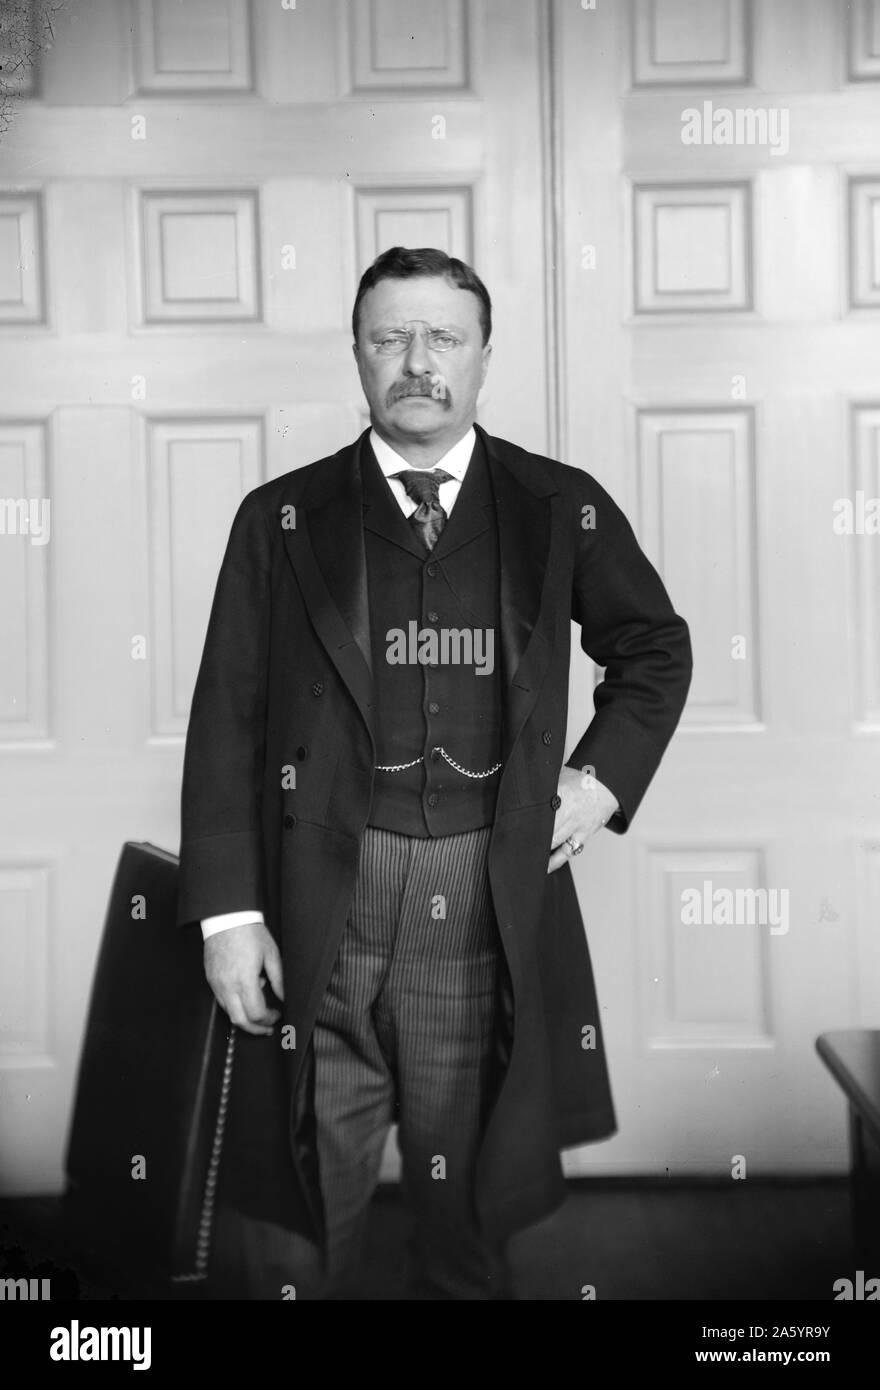 President Theodore Roosevelt (1858-1919) 26th President of the United States, American politician, author, naturalist, soldier, explorer, and historian. Dated 1900 Stock Photo